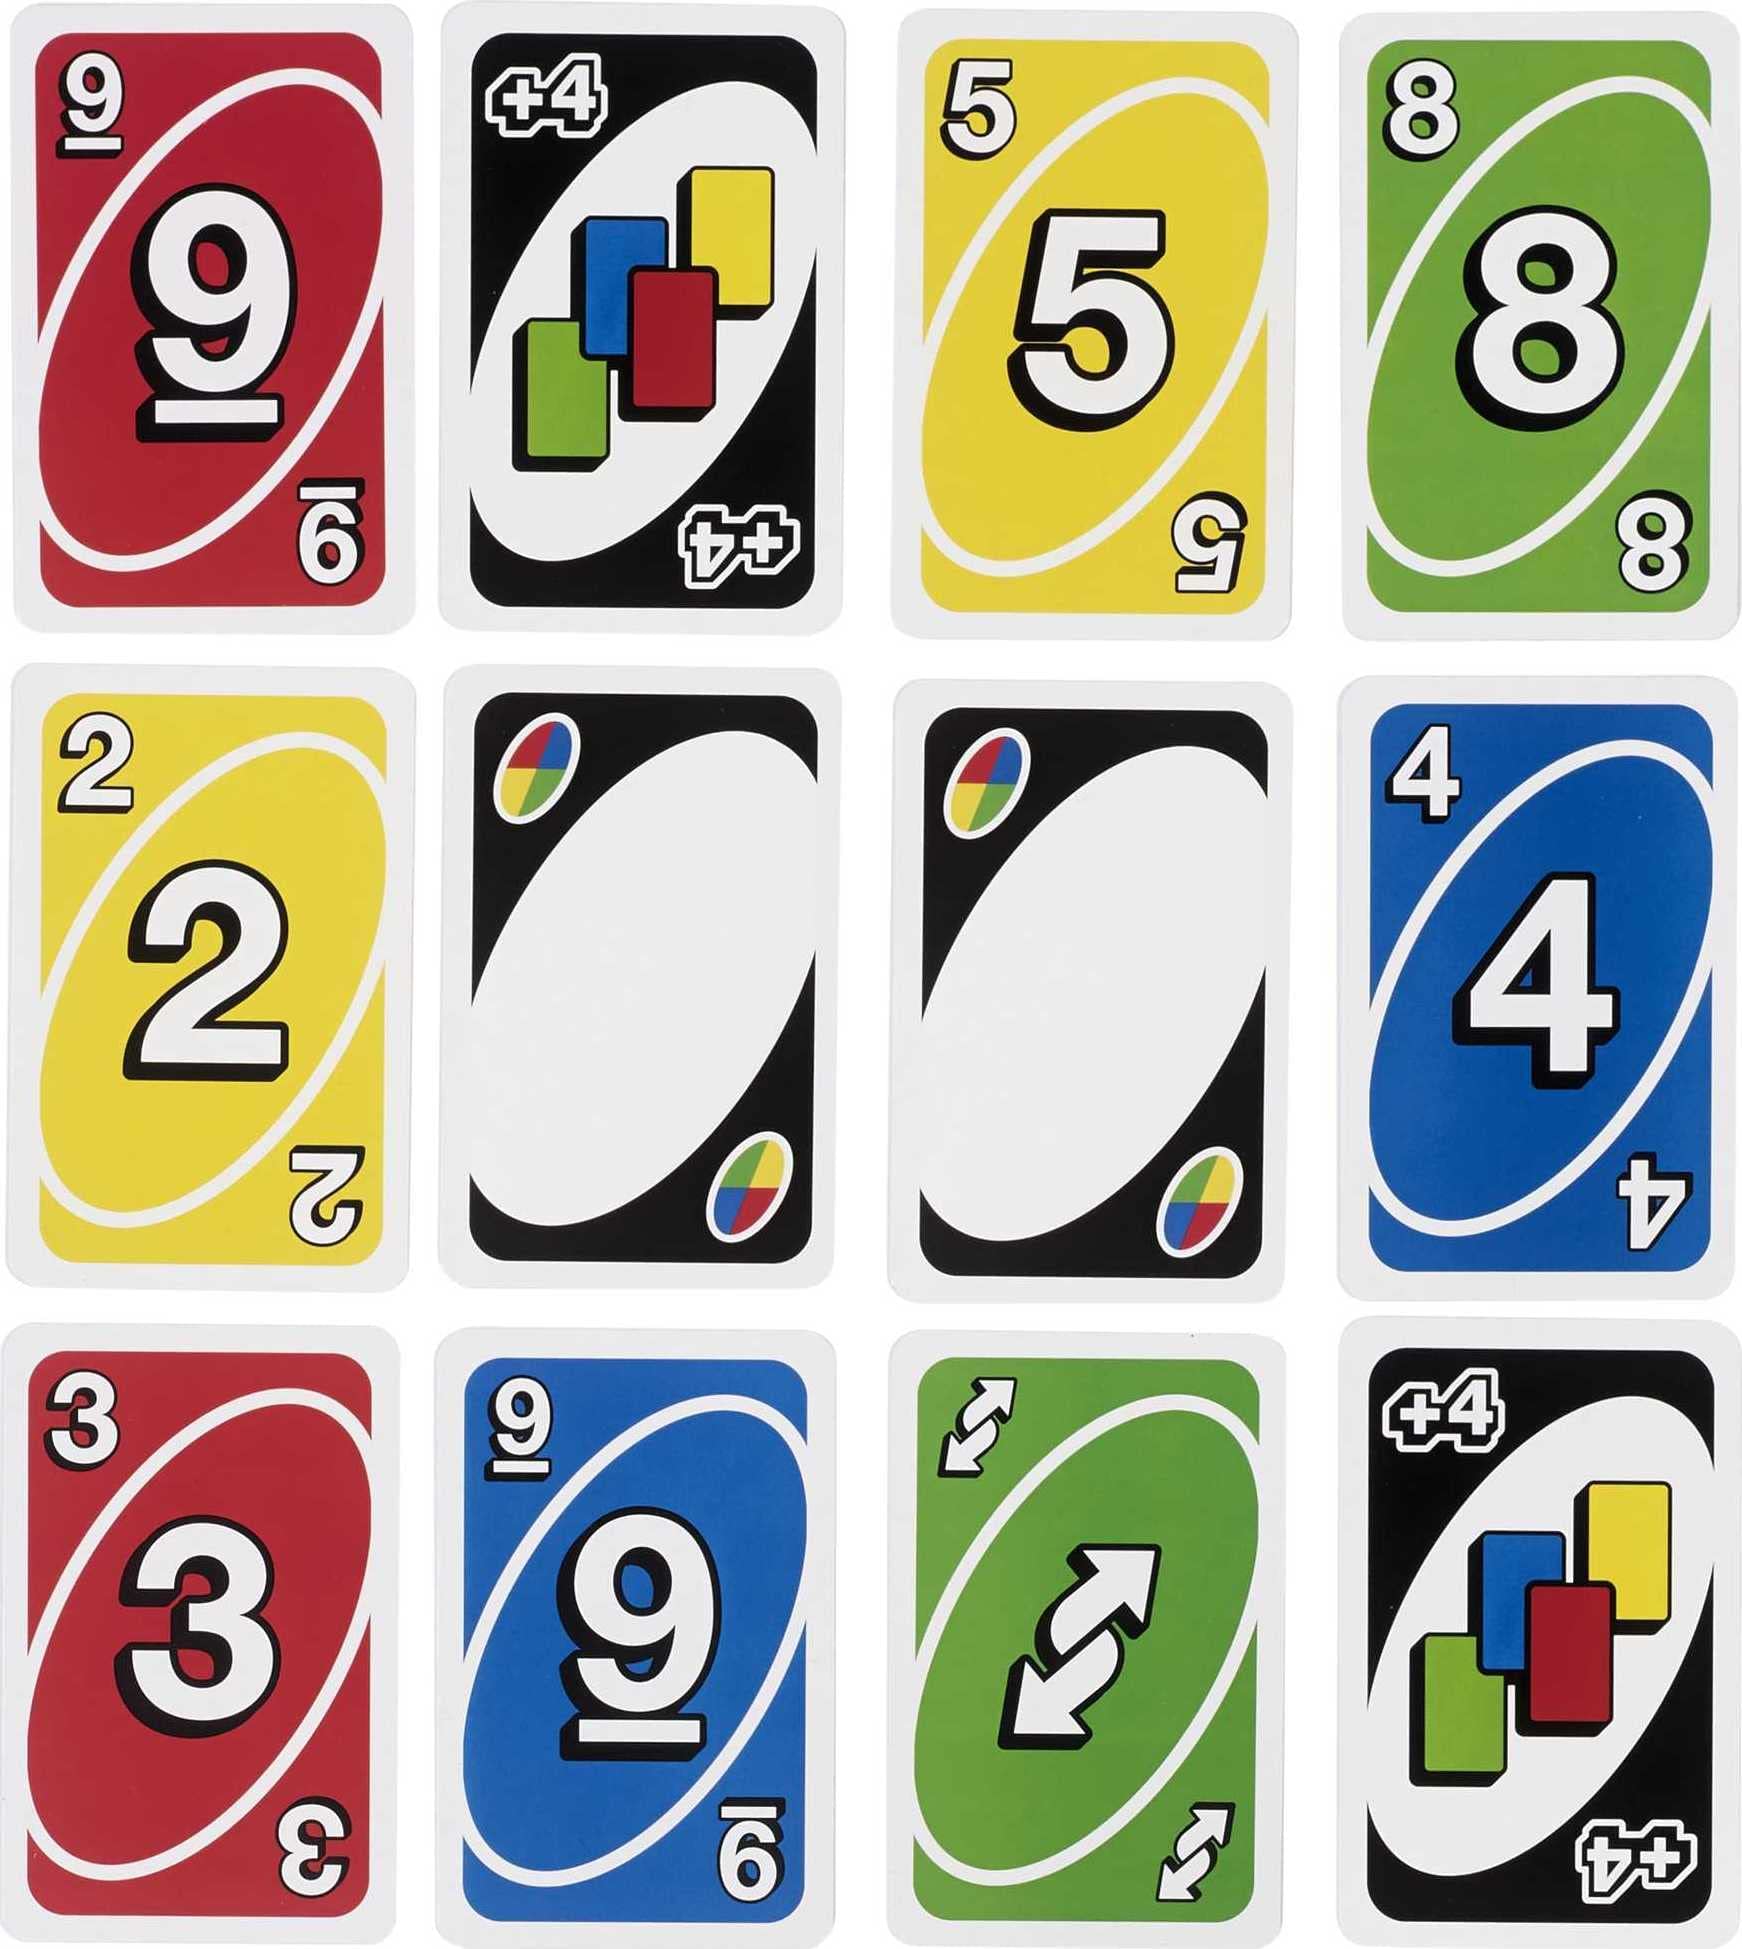 ​Giant UNO Card Game for Kids, Adults & Family Night, Oversized Cards & Customizable Wild Cards for 2-10 Players